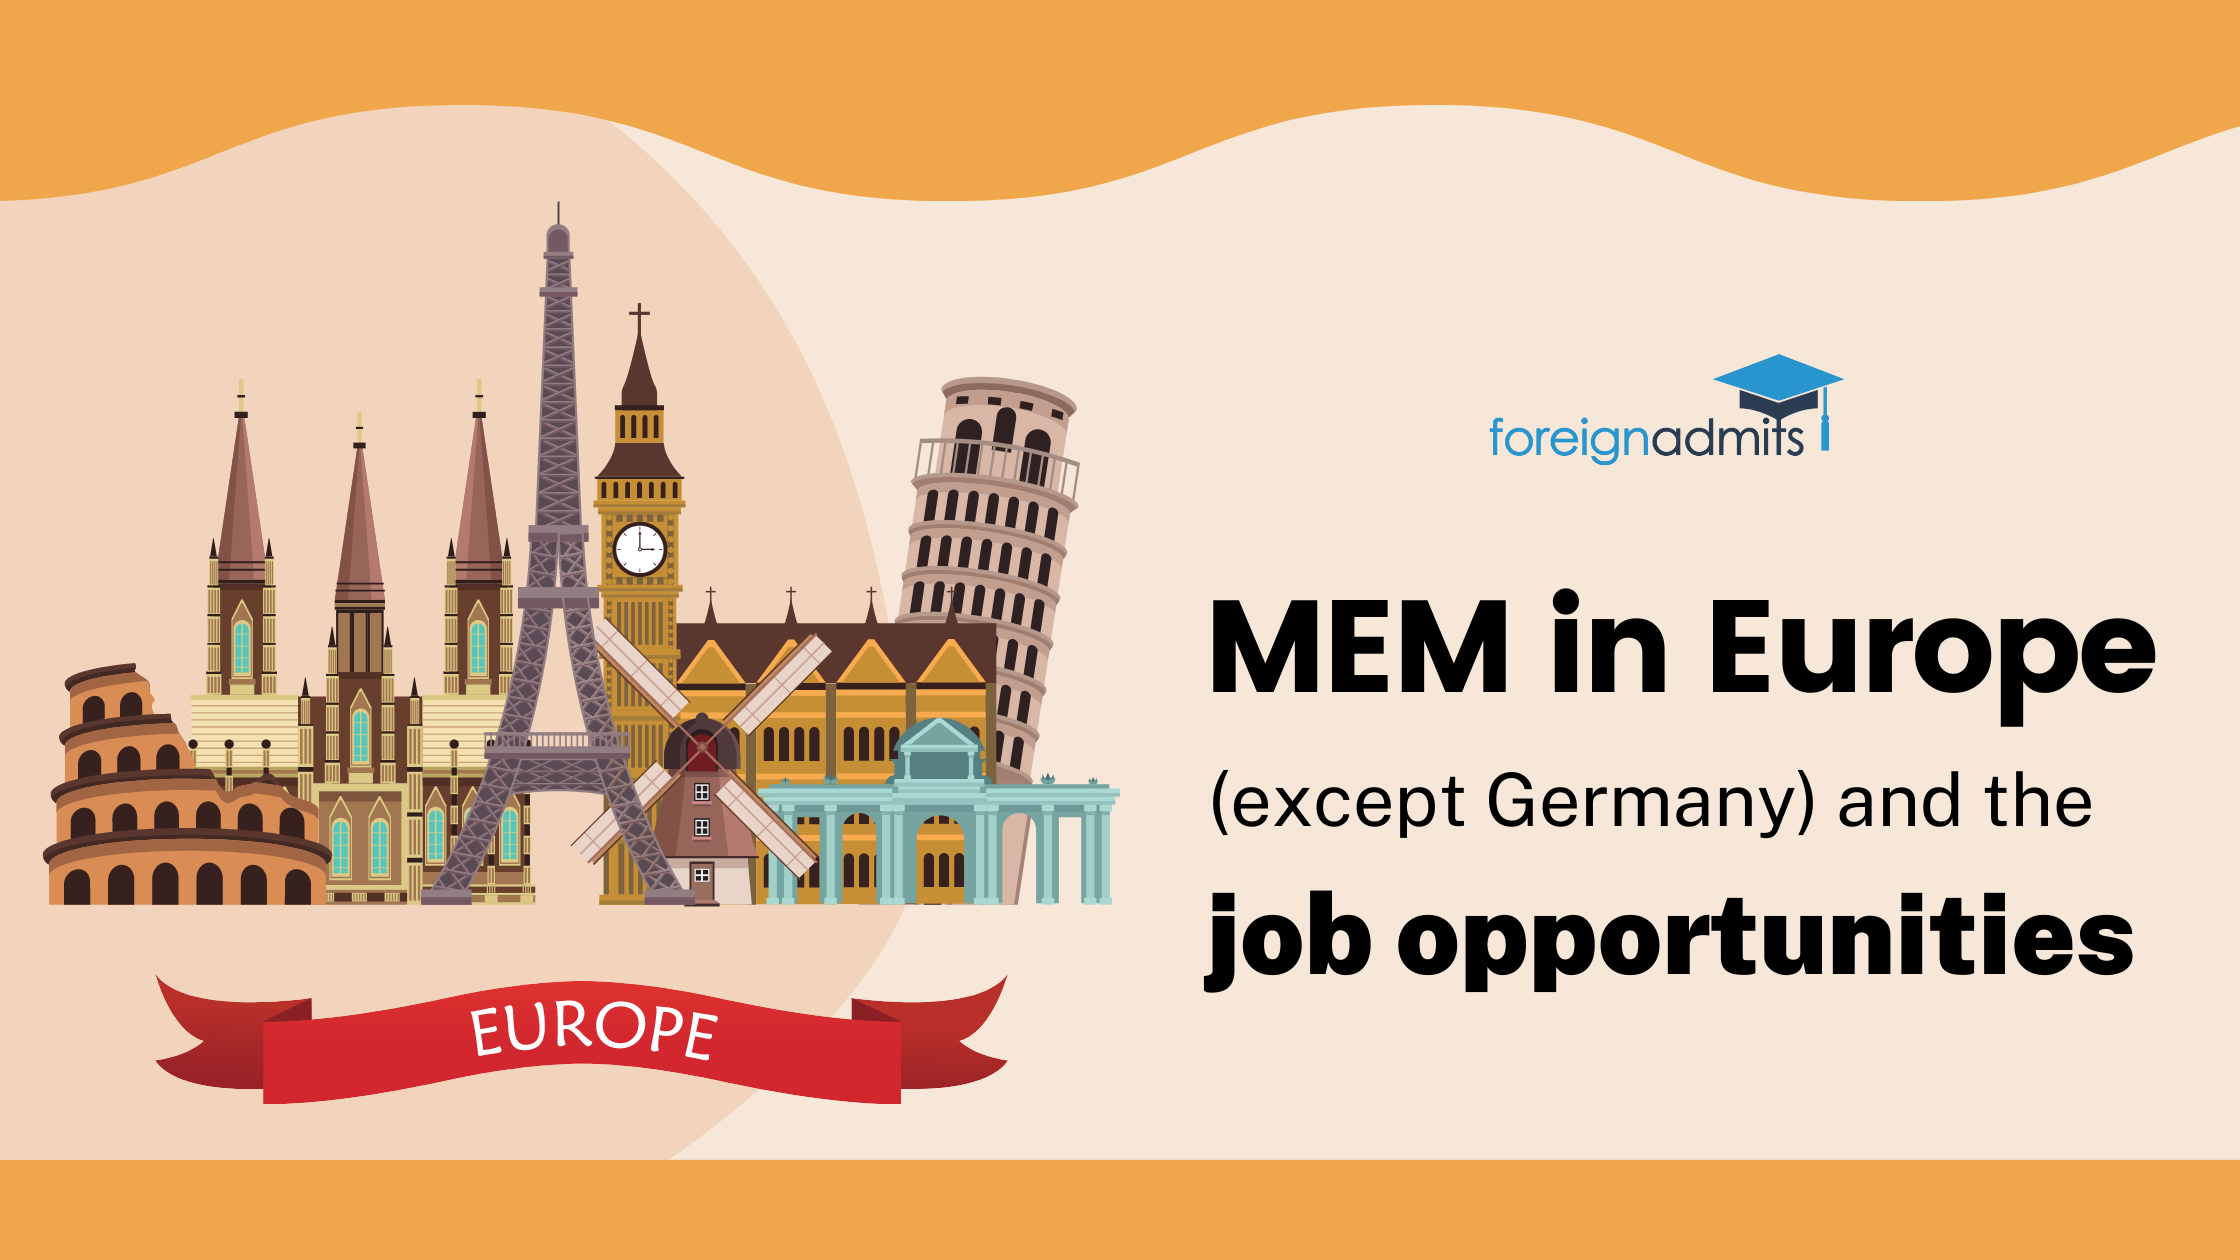 MEM in Europe (except Germany) and the job opportunities